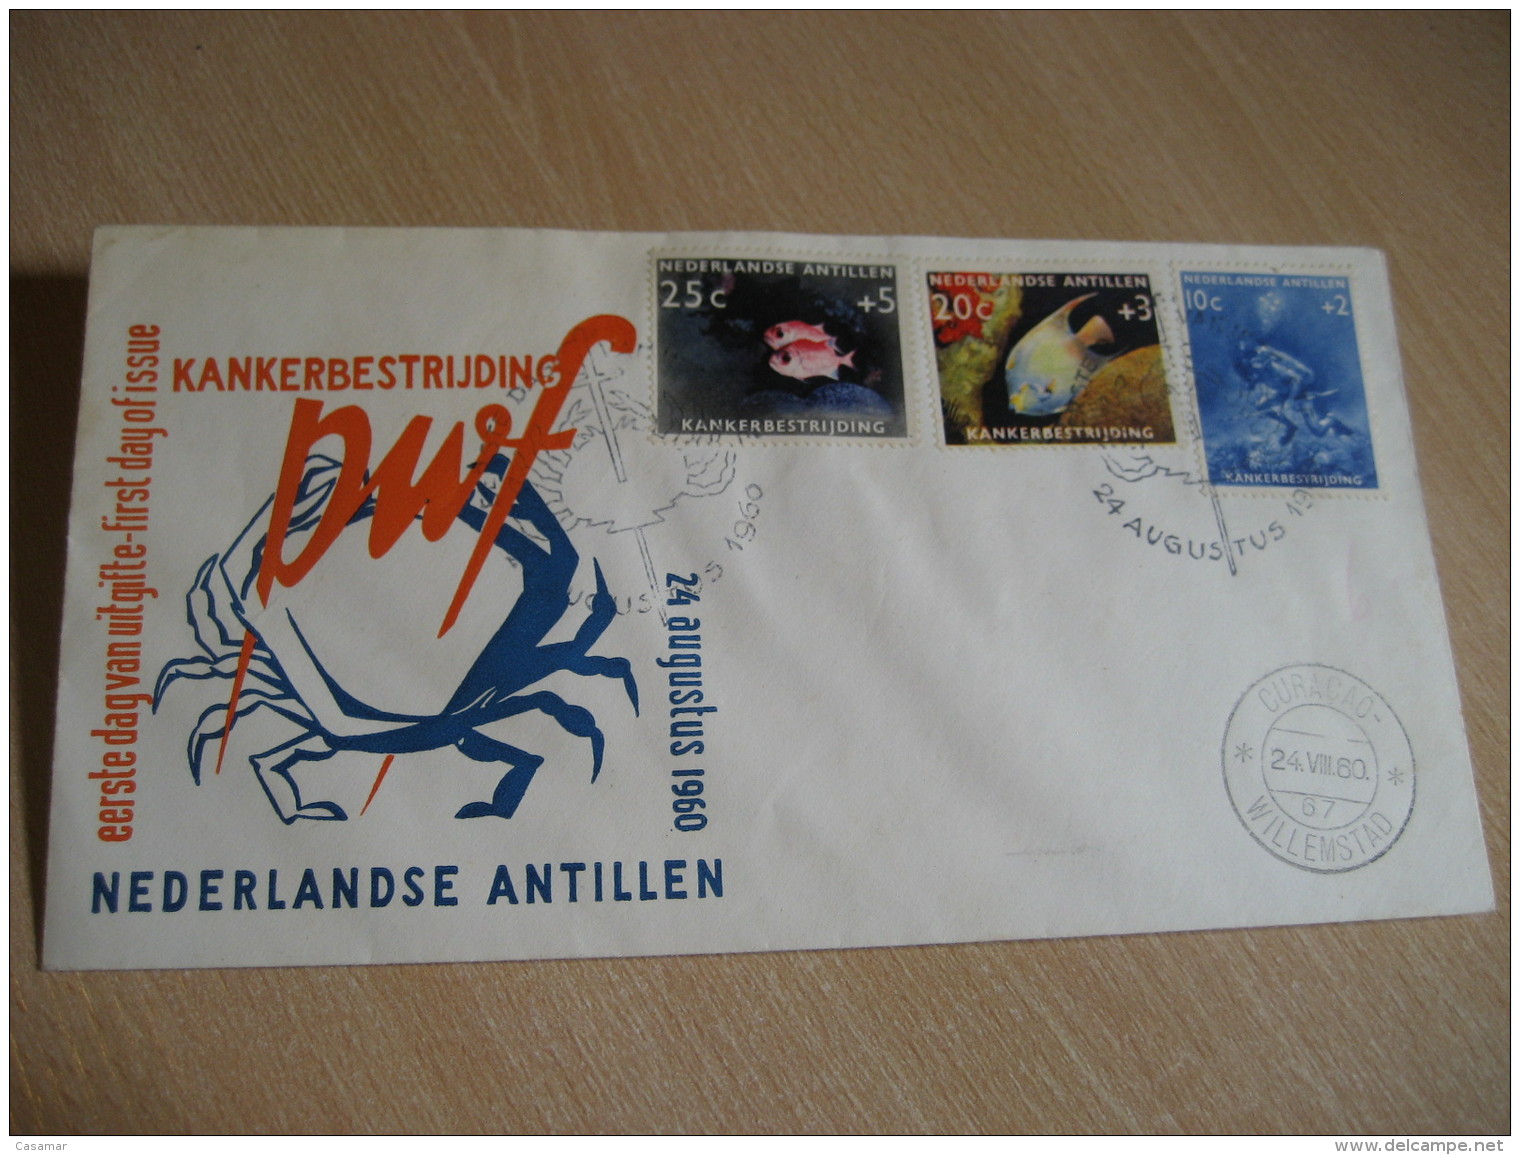 DIVING Cancer Health CURAÇAO 1960 FDC Cancel Cover NETHERLANDS ANTILLES WEST INDIES - Tauchen